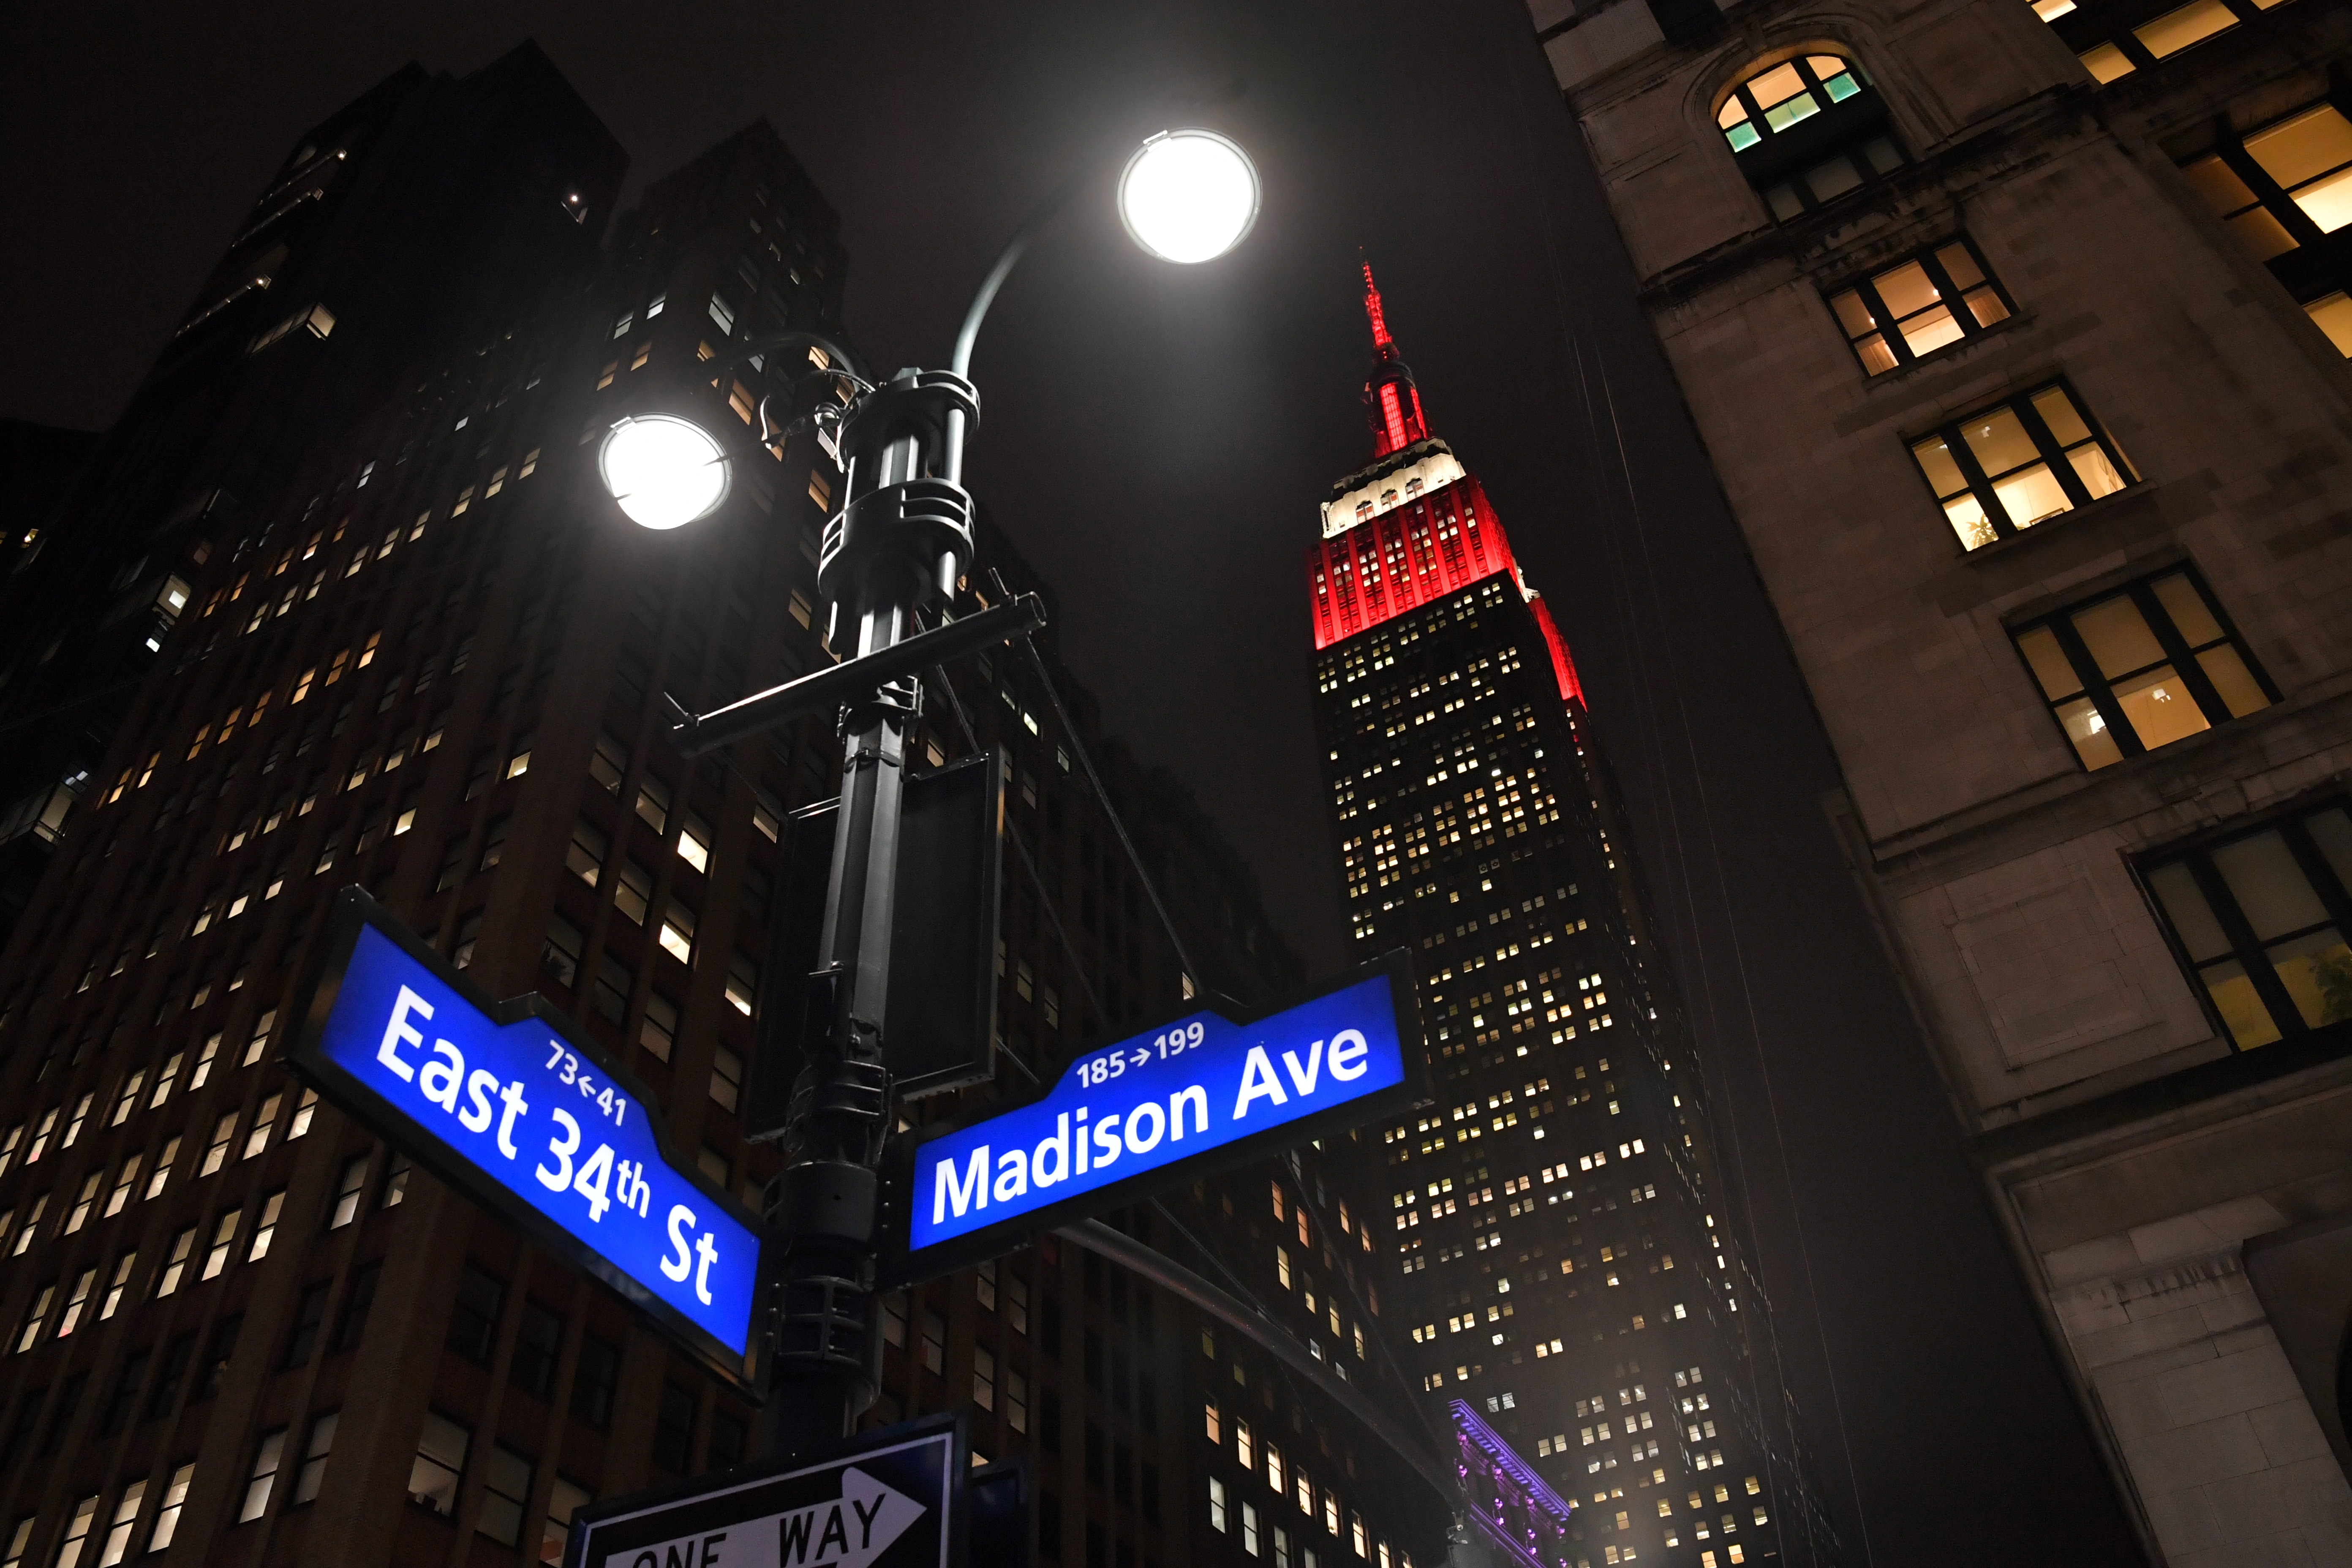 ESB lit in red and white